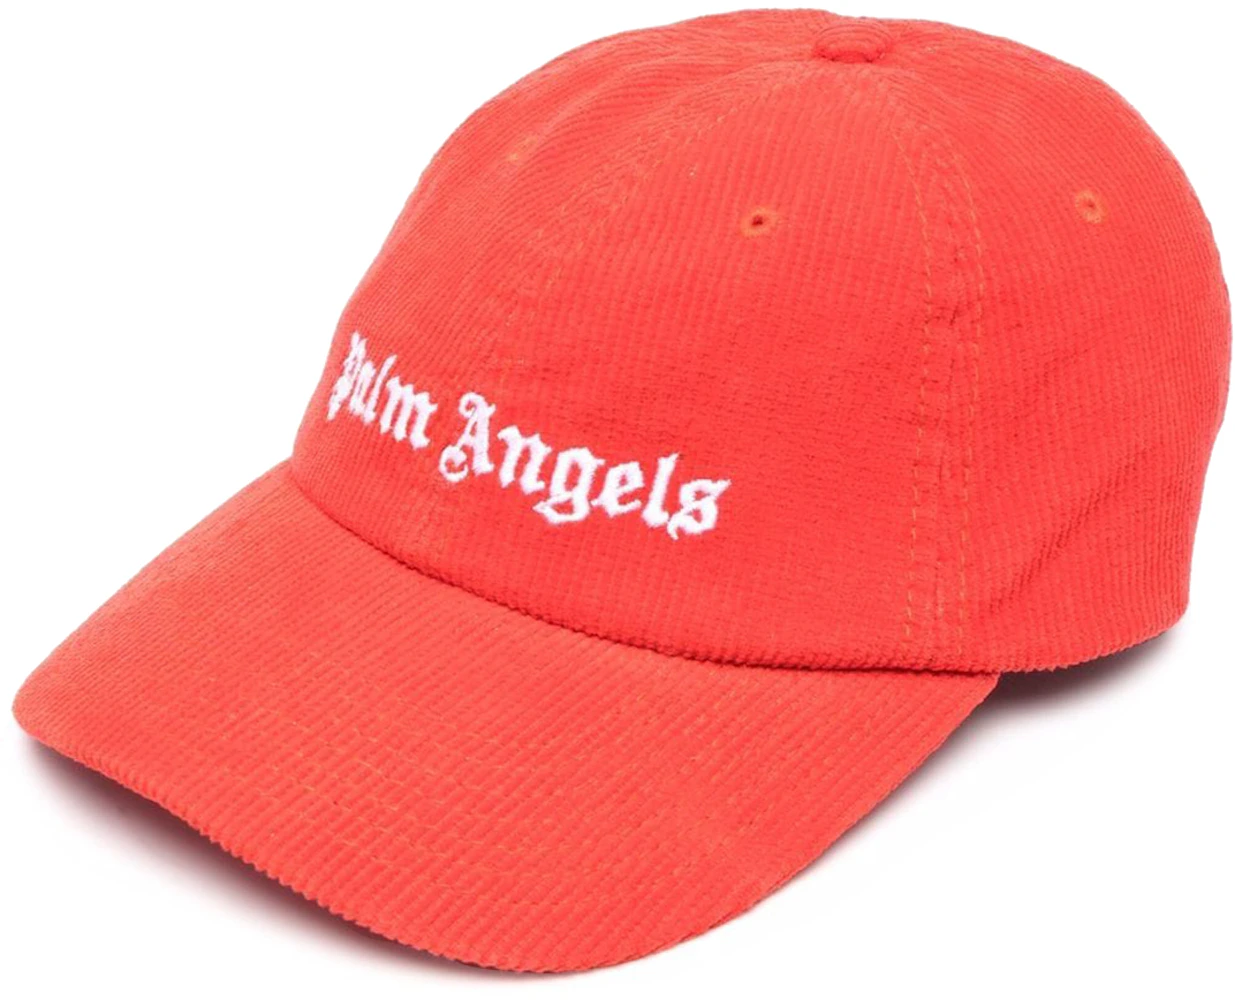 Palm Angels Corduroy Embroidered Logo Cap Red White Men's - FW21 - US